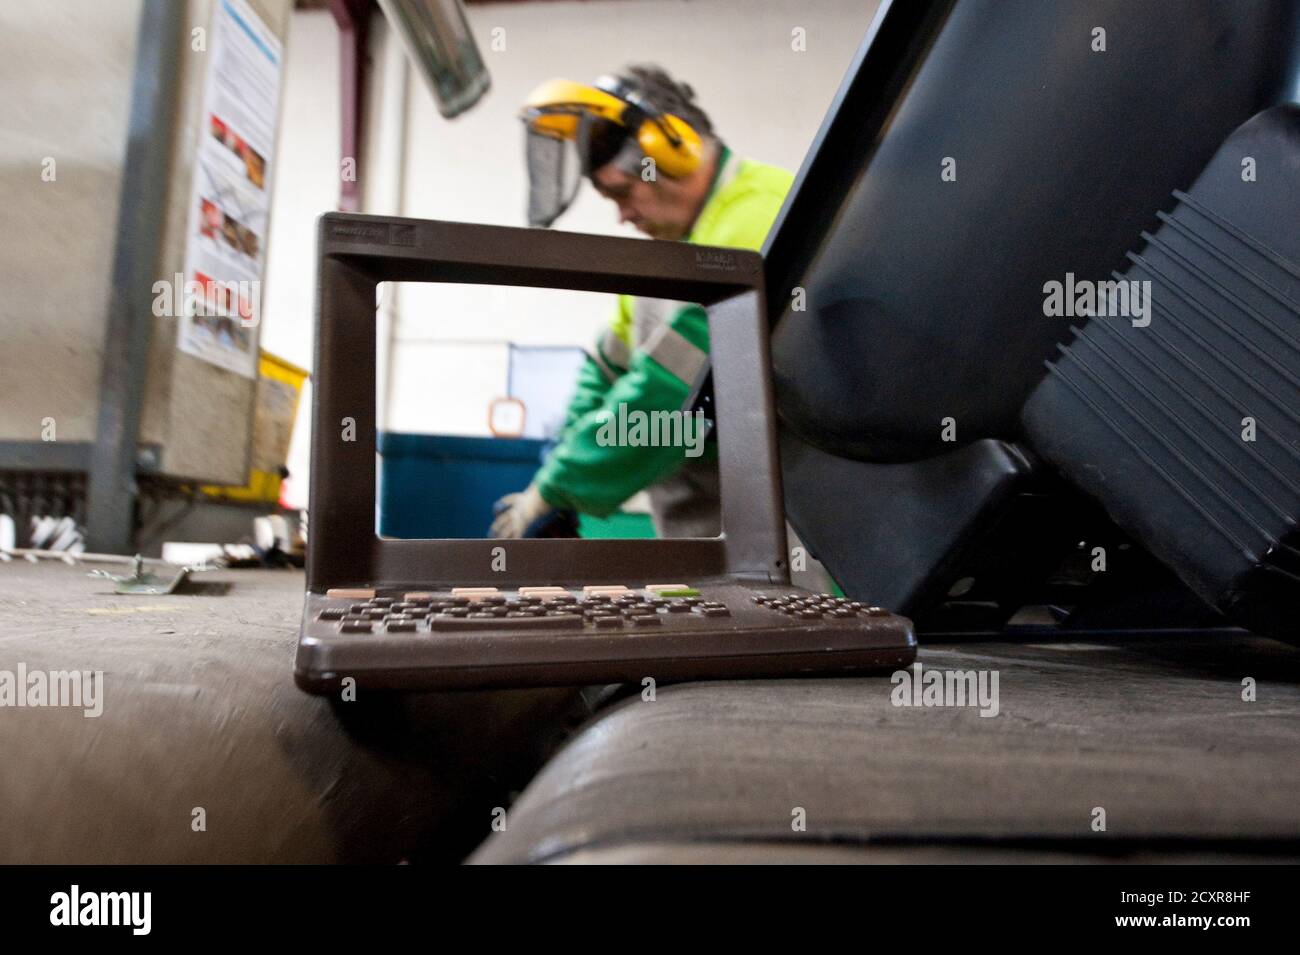 The plastic shell of a French Minitel terminal moves on a conveyor belt as it is broken down for recycling in Portet-Sur-Garonne, southwestern France May 23, 2012. The Minitel, the box-like terminal with a keyboard and monochrome screen, was introduced on the market in 1982 by telecommunications operator France Telecom and used by the French to get information as a phone directory or to purchase train tickets. Although there are between 600,000 - 700,000 of the units still in use, the Minitel service will end on June 30, 2012.    REUTERS/Bruno Martin   (FRANCE - Tags: SCIENCE TECHNOLOGY ENVIRO Stock Photo